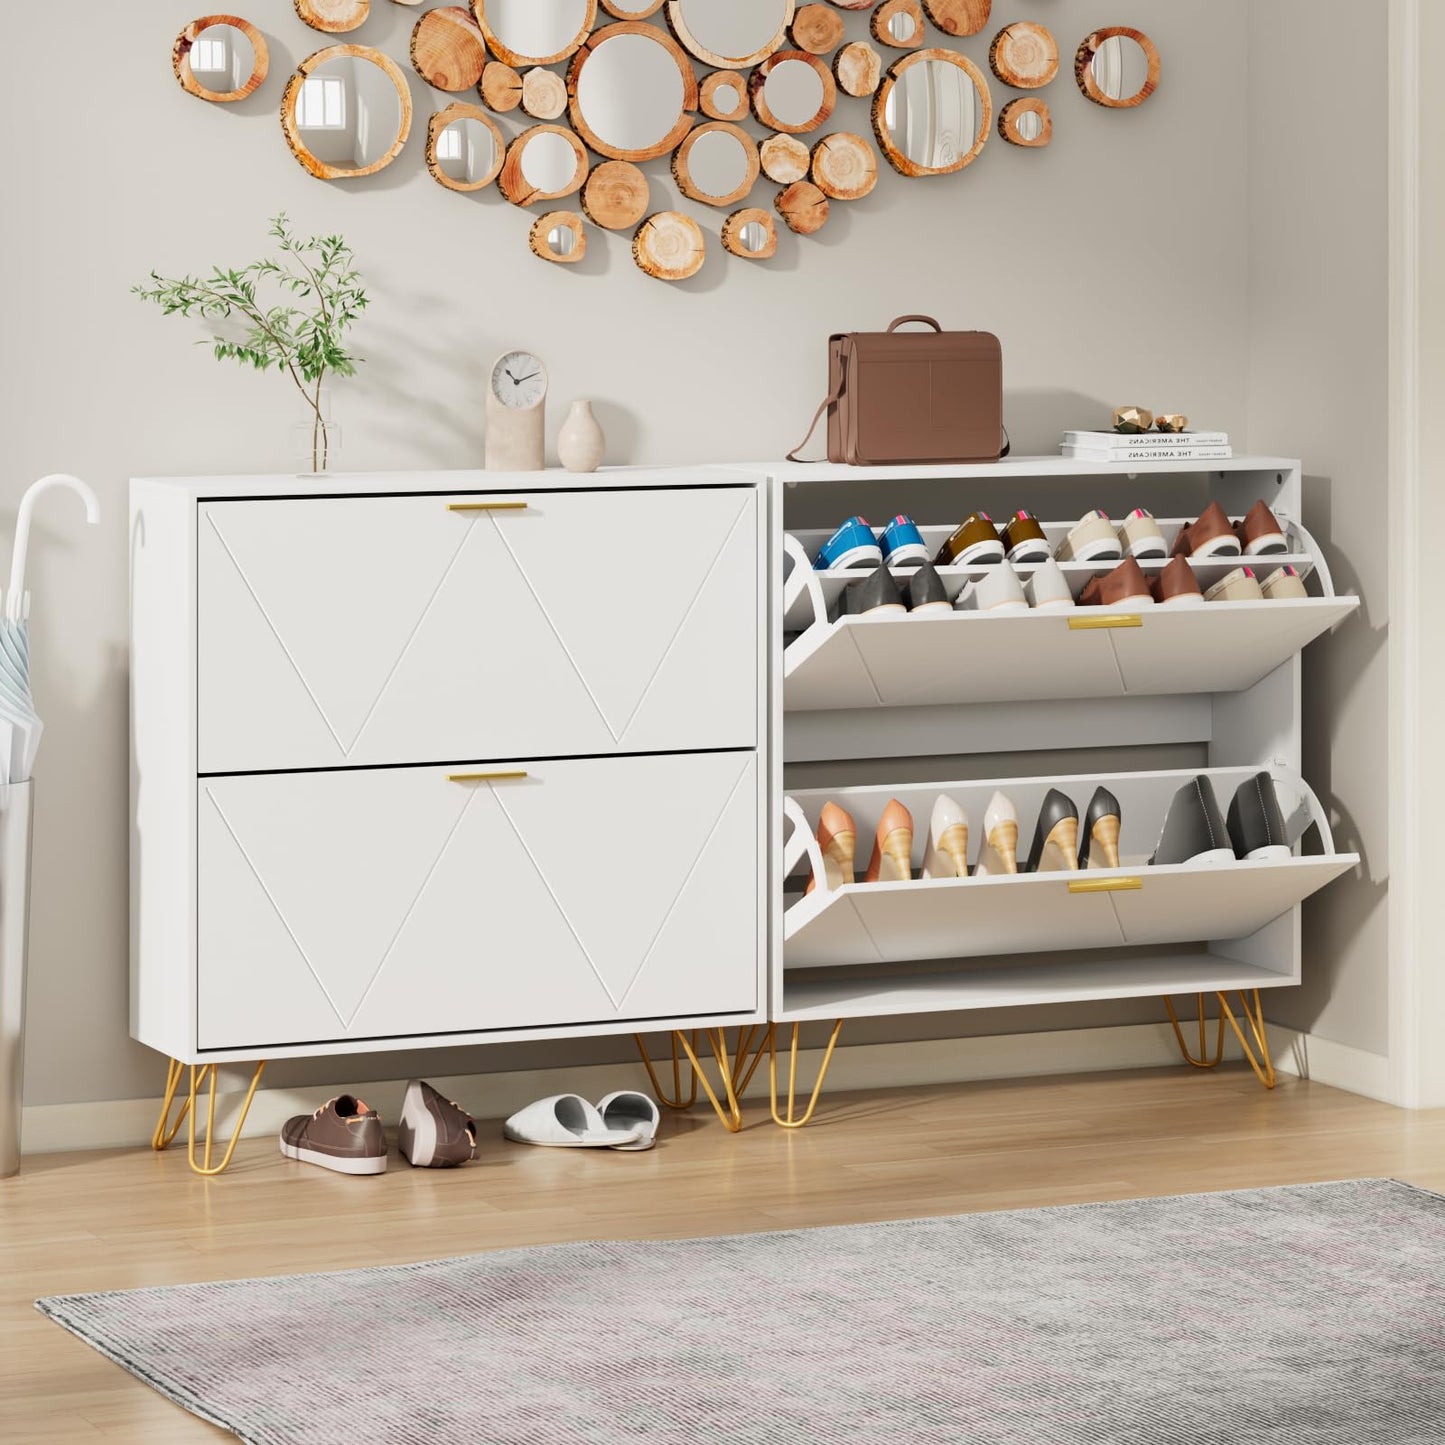 CARPETNAL Shoe Cabinet for Entryway Slim, White Shoe Storage Cabinet with 2 Flip Drawers, Narrow Shoe Rack Cabinet, Freestanding Shoe Cabinet